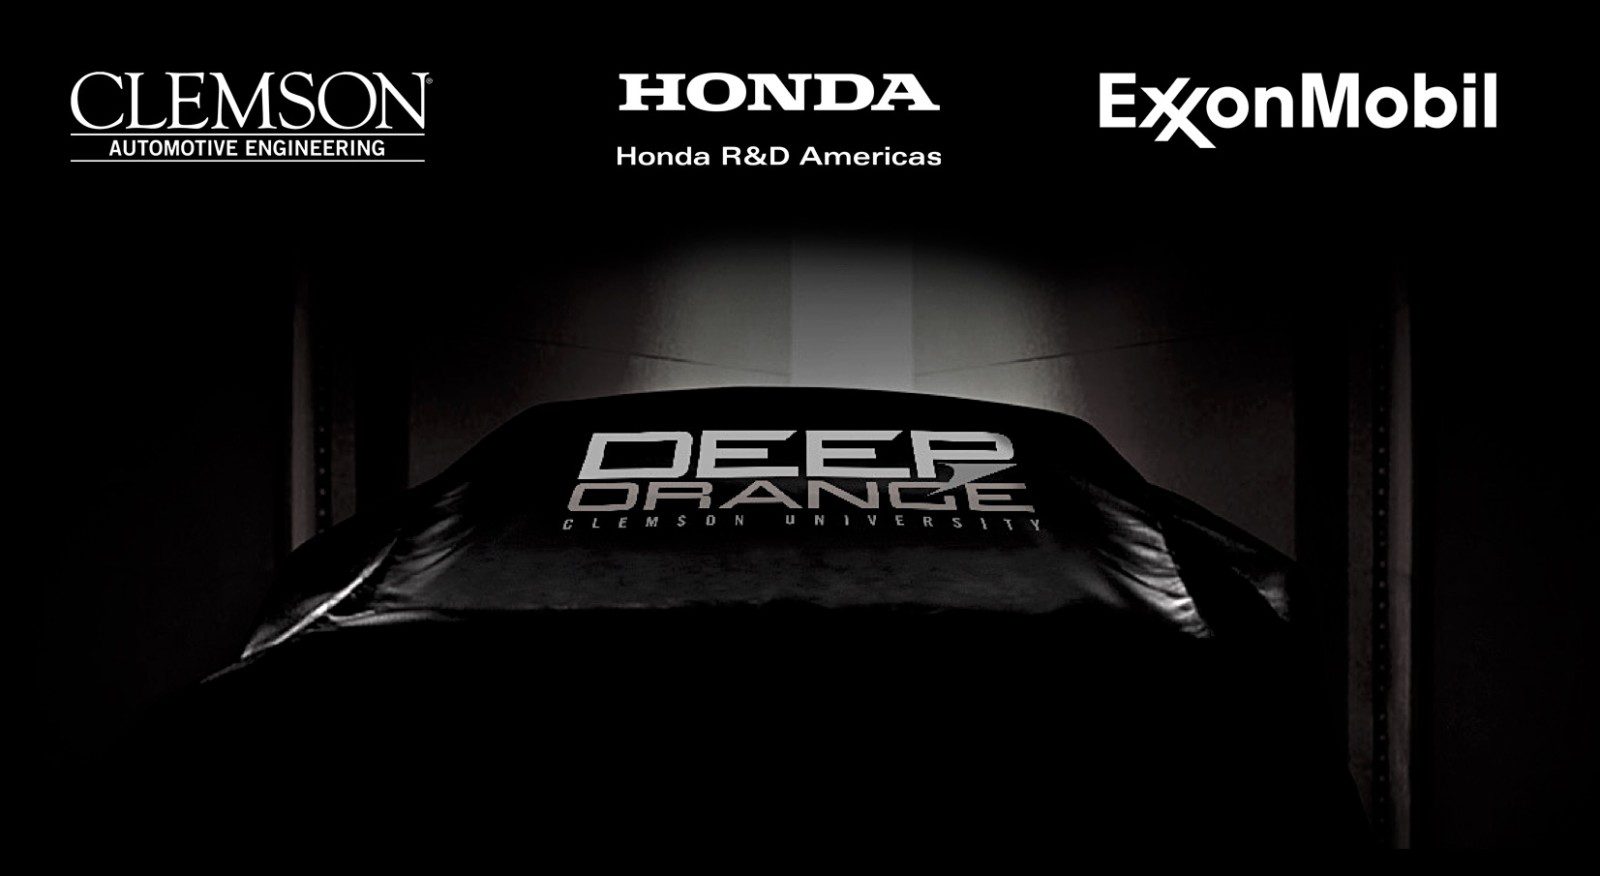 Black and white image of car covered with protectant cover that says DEEP ORANGE. University, Honda and Exxon logos are across the top.